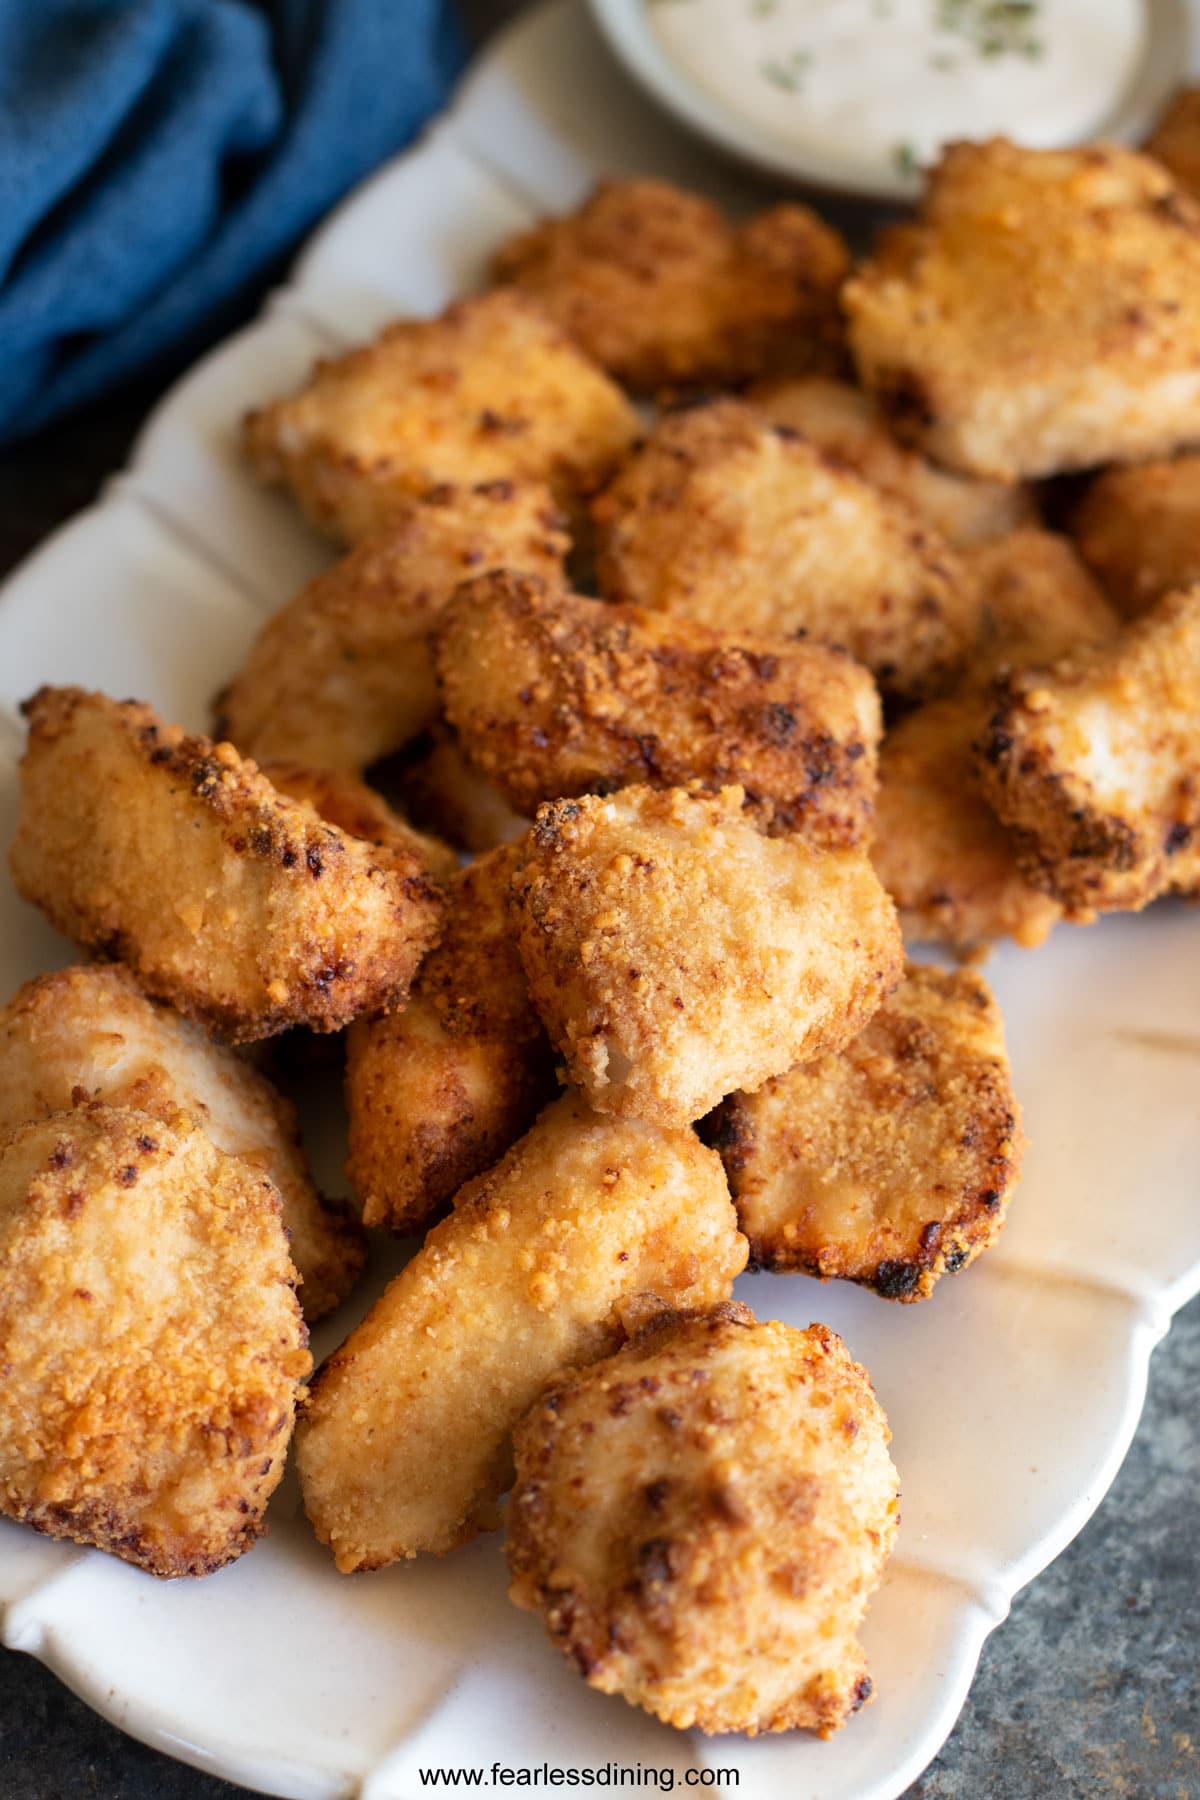 A platter filled with air fried gluten free chicken nuggets.